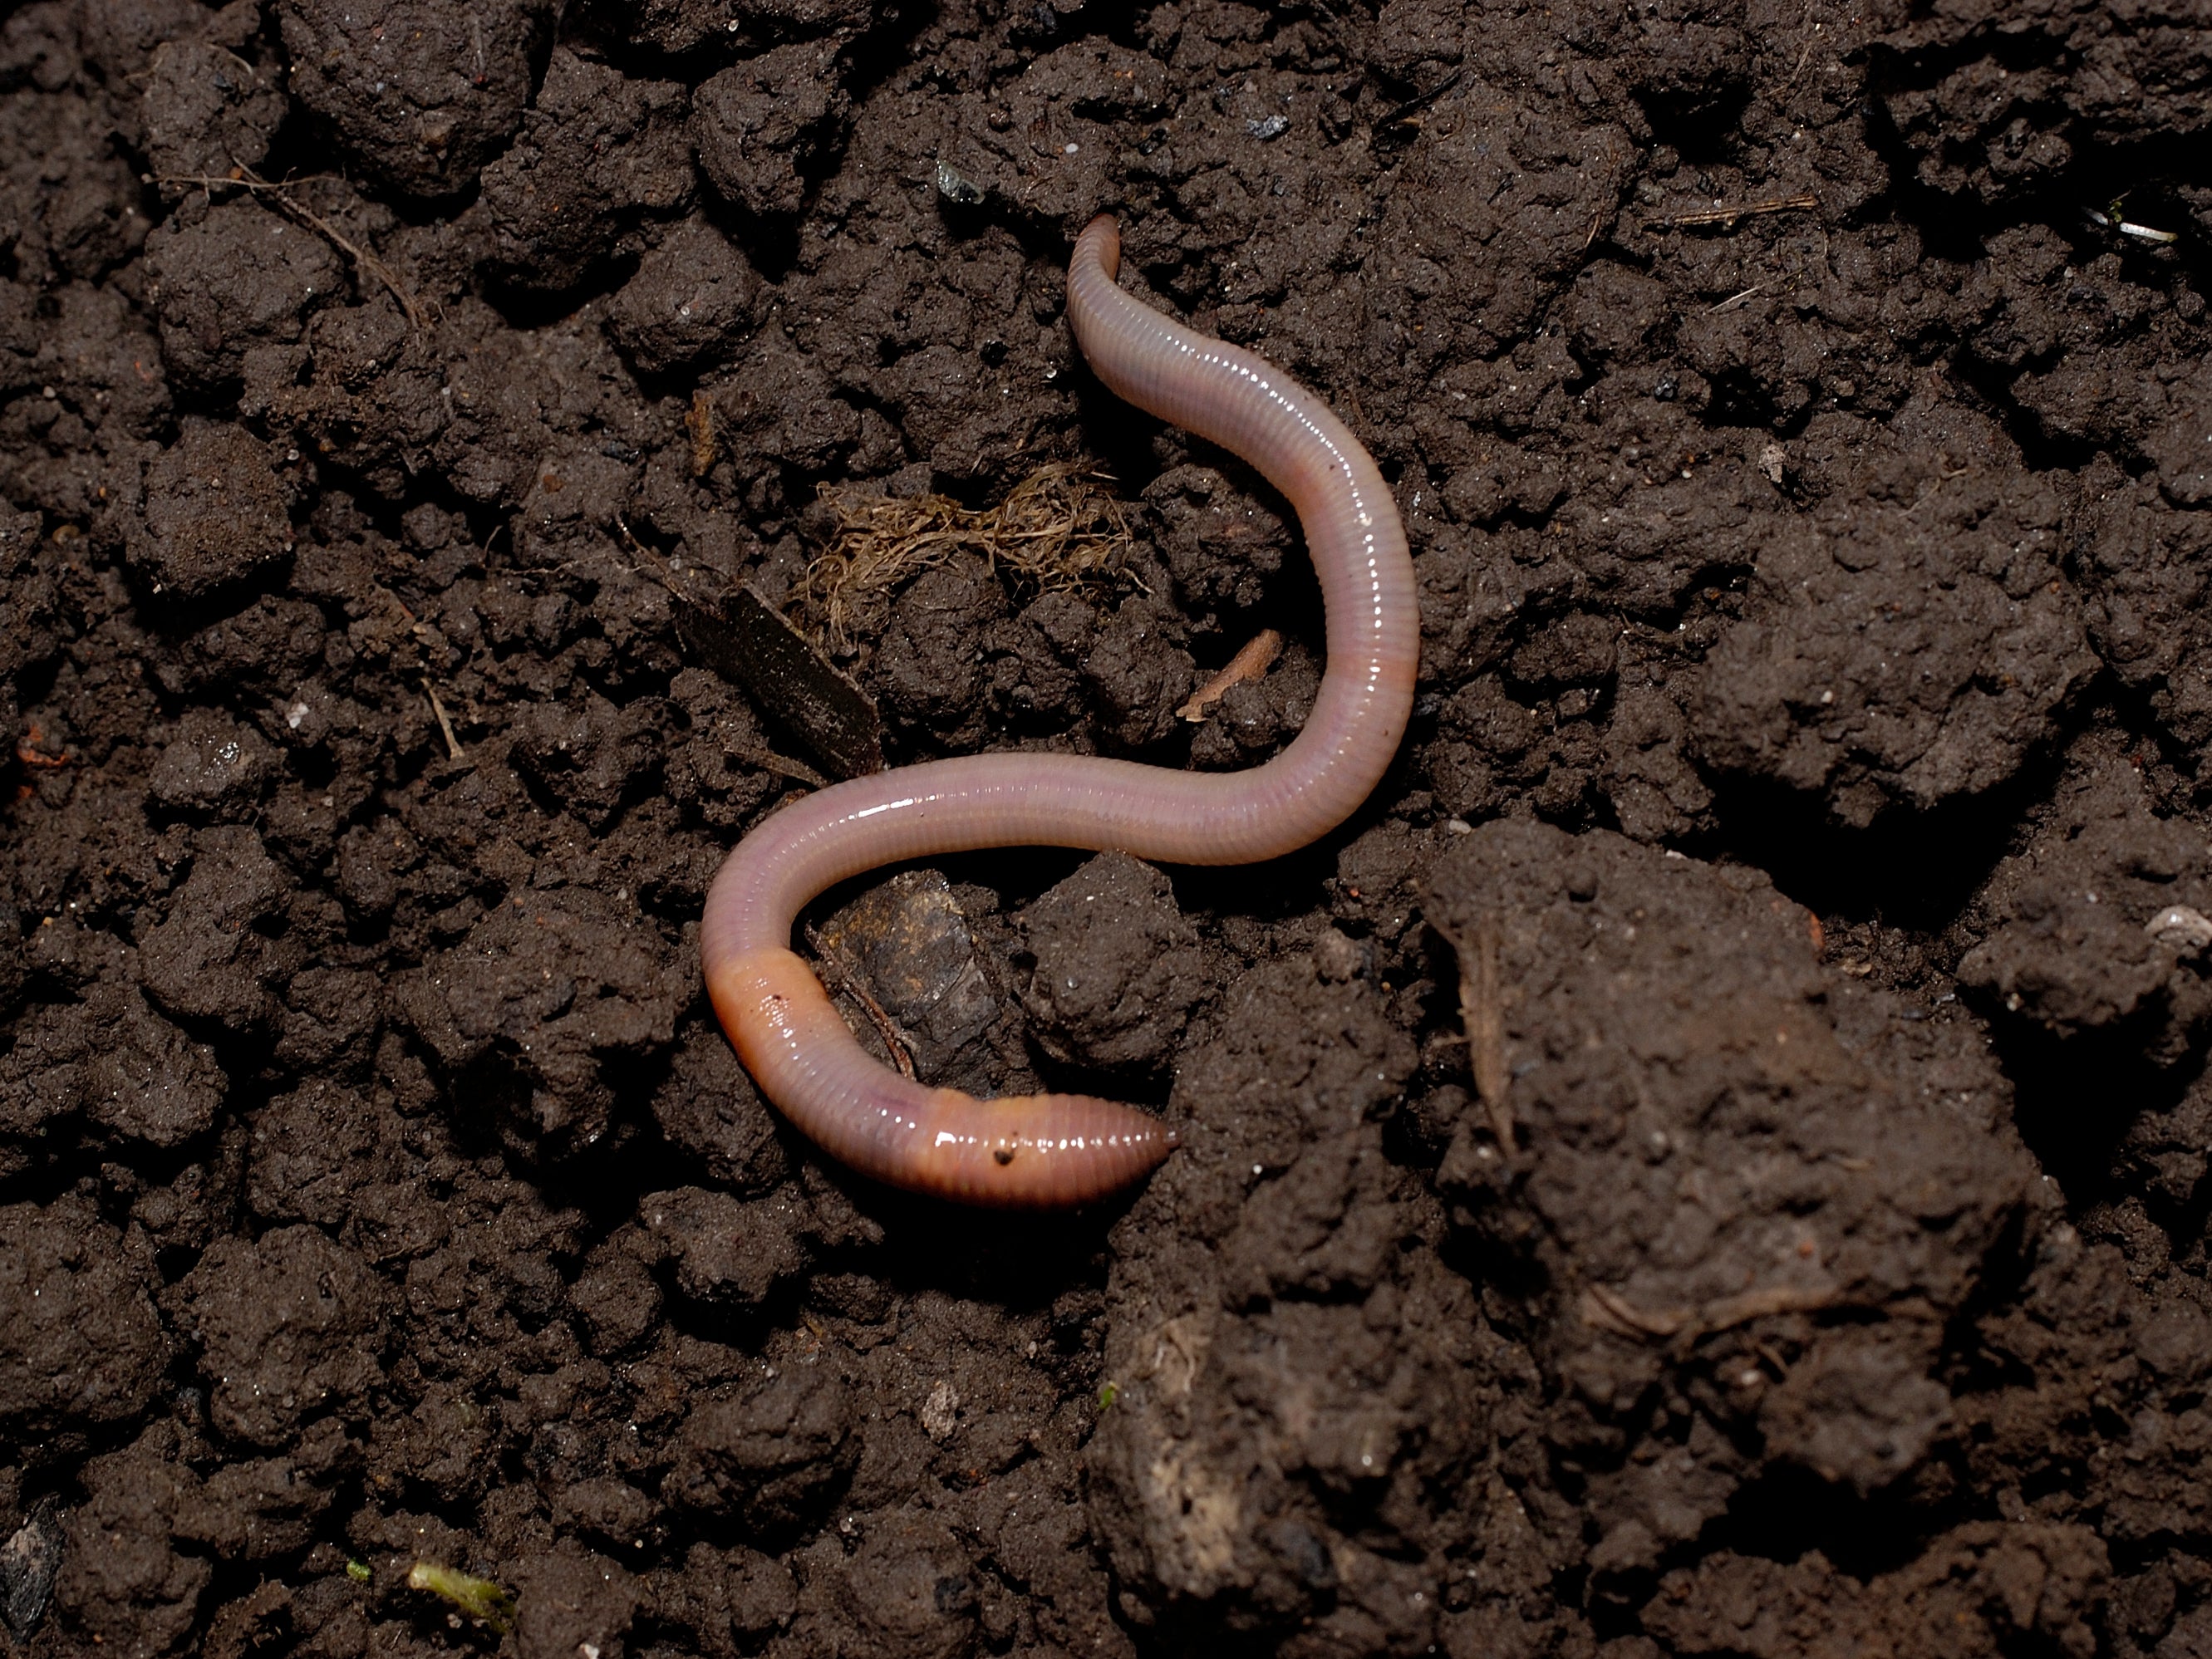 How do worms move through hard soil, and how far can ants see?